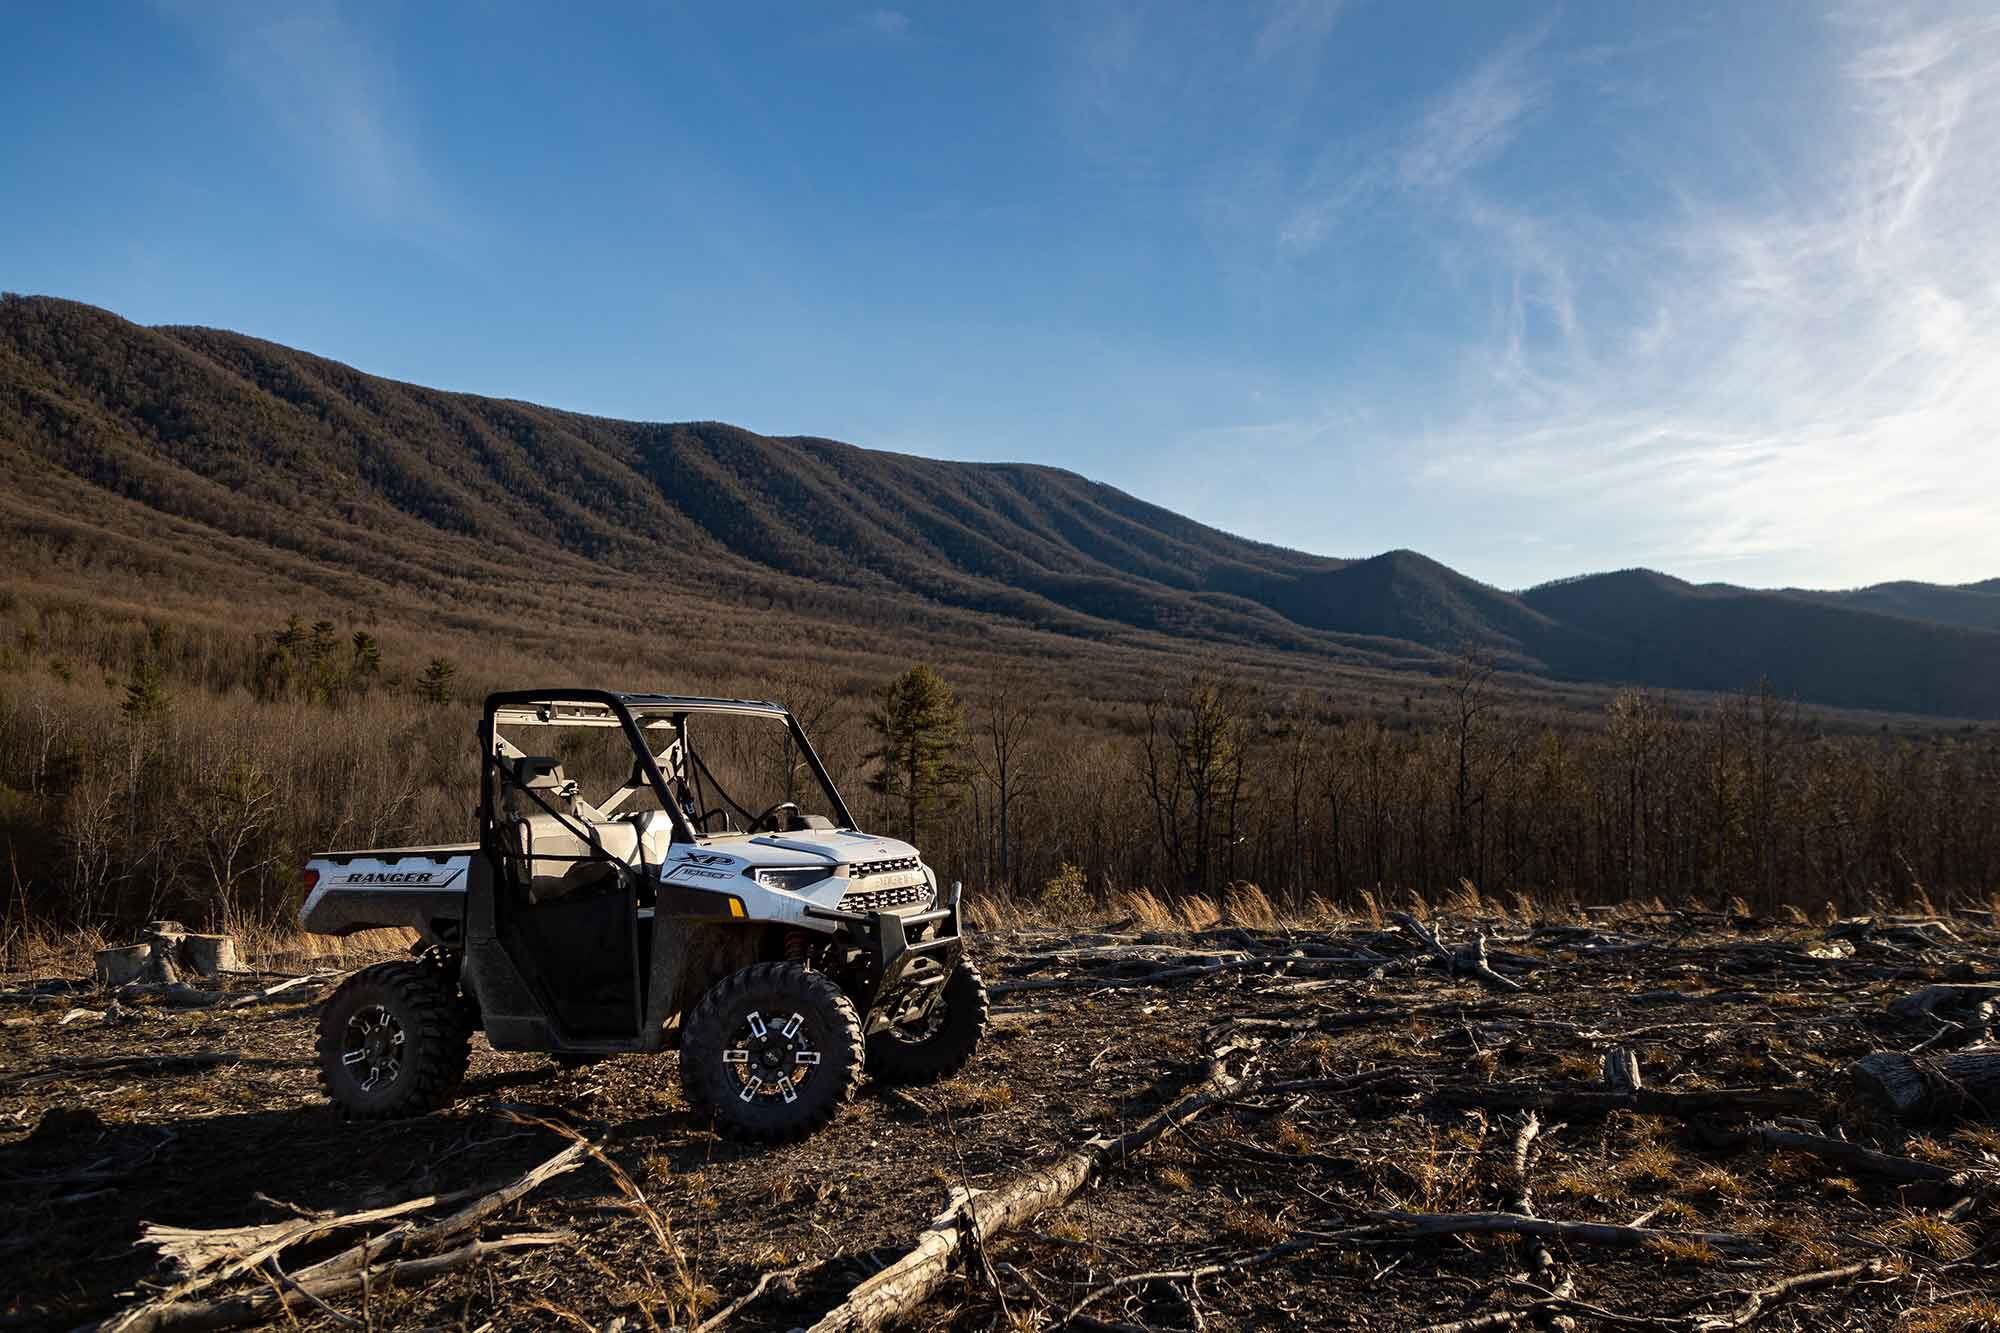 Just a Polaris Ranger looking majestic in front of the Blue Ridge.